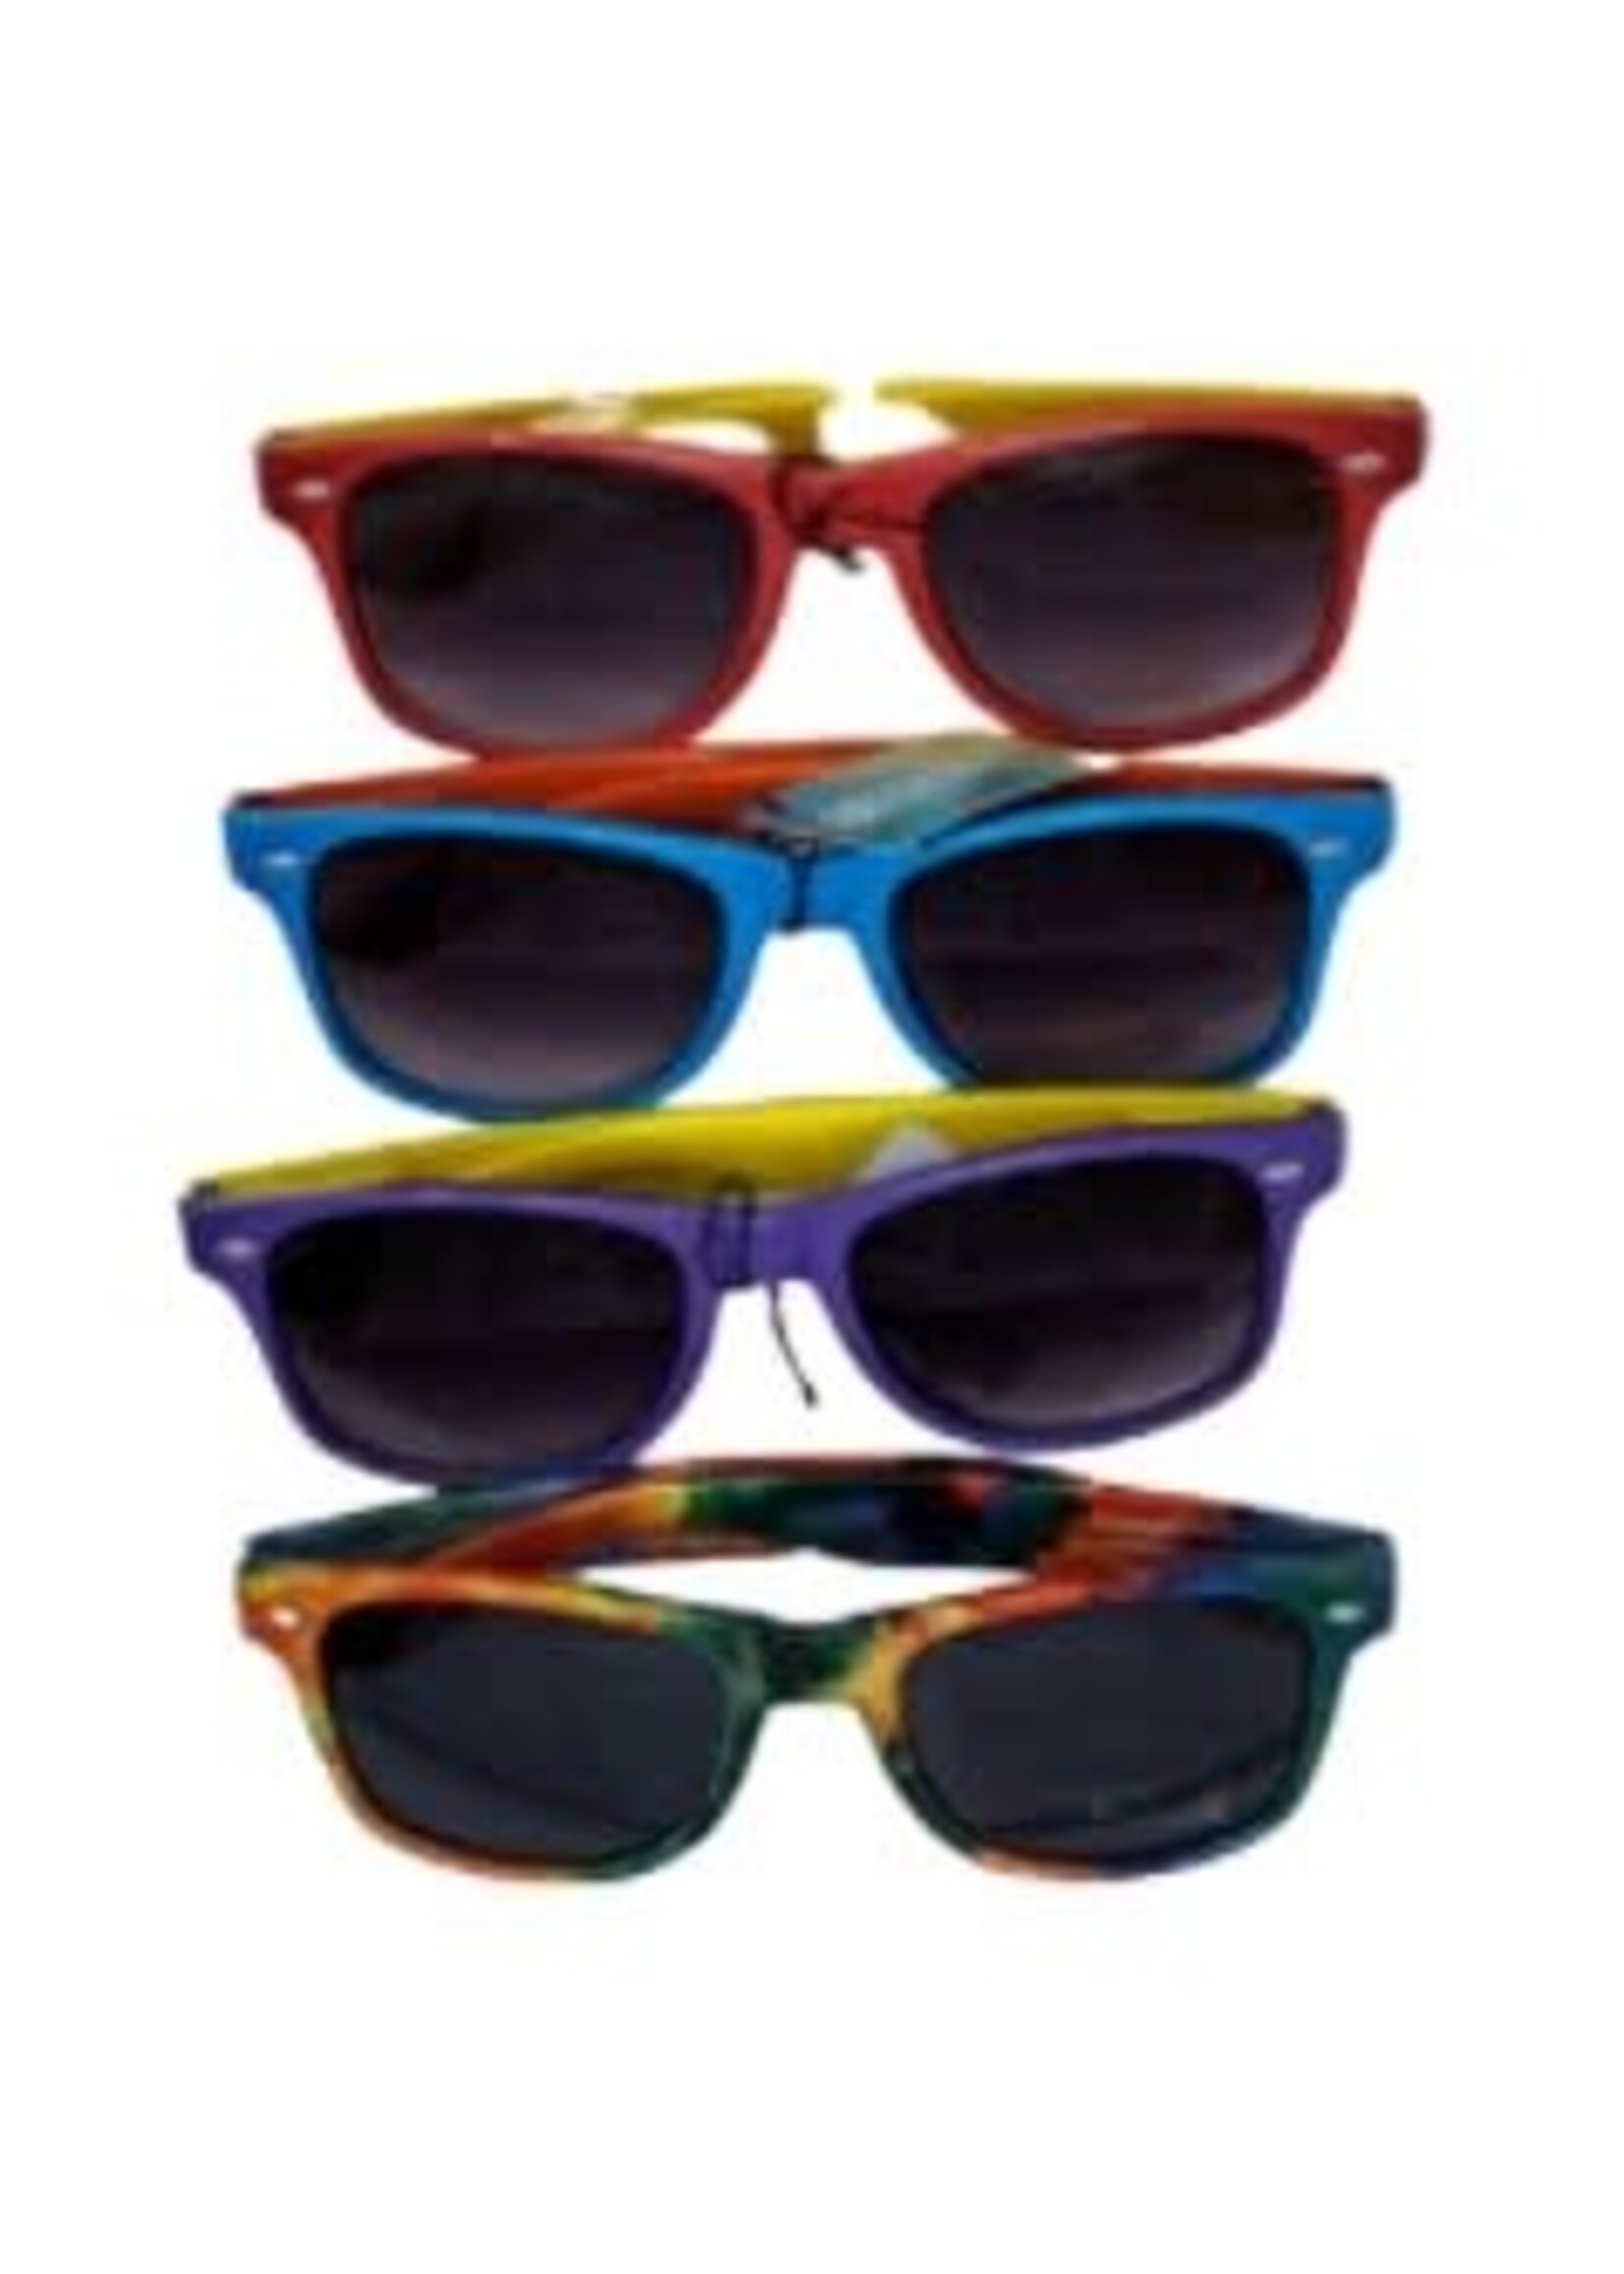 Camp Mary Elizabeth Sunglasses - Assorted Colors